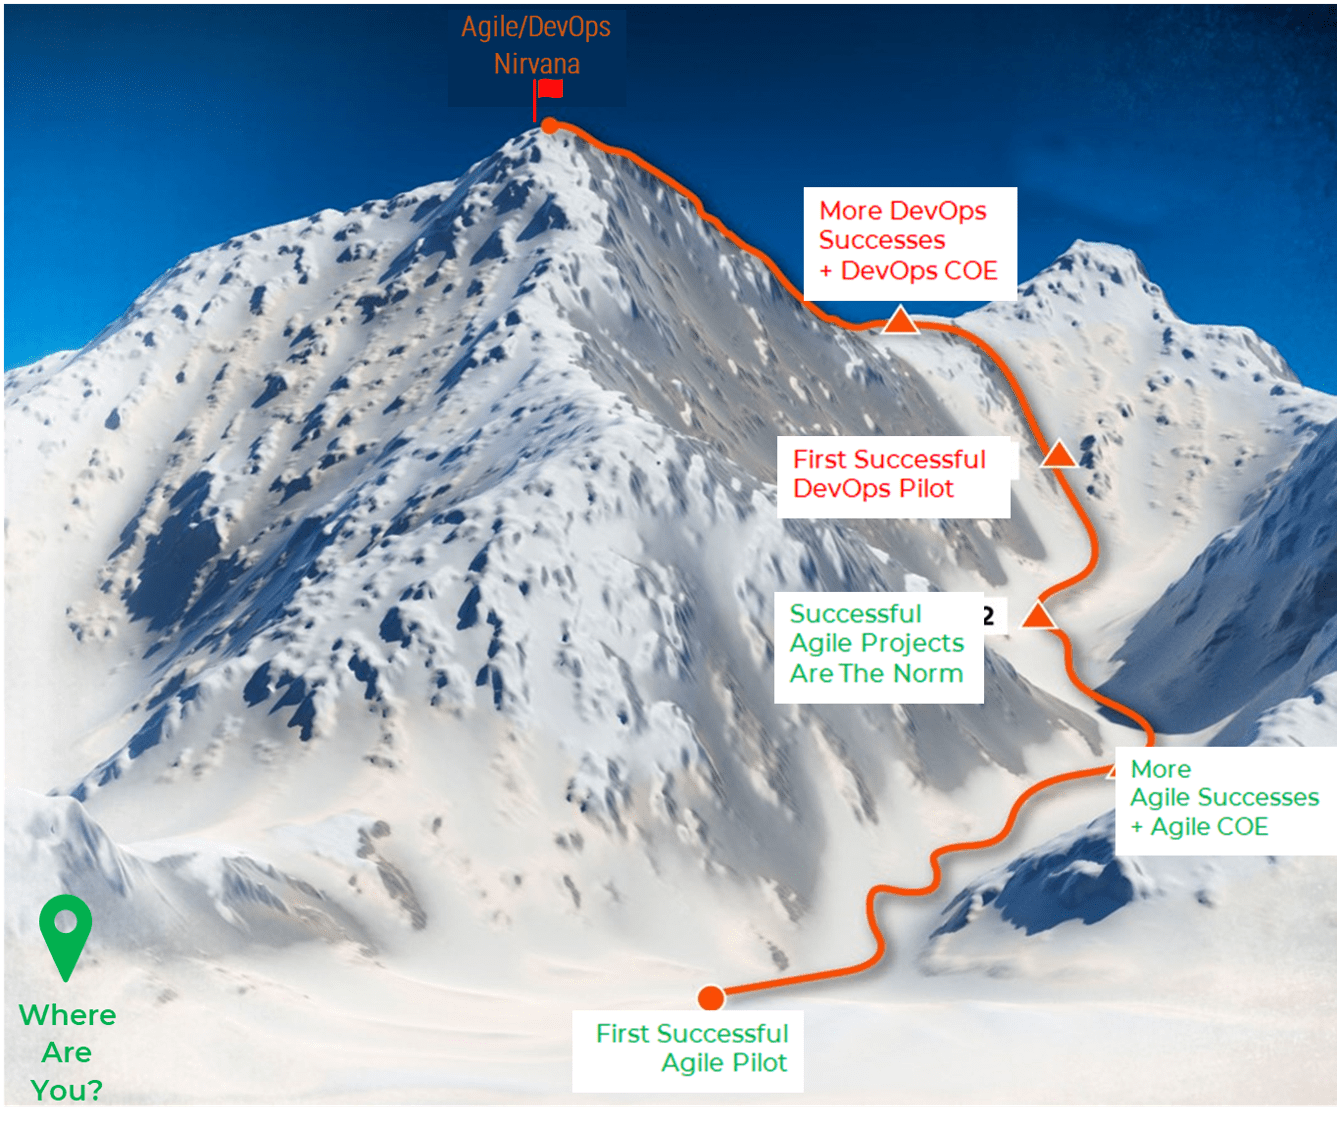 An image of the trail to climb Mount Everest, with the camps replaced by the main steps of the agile approach to reaching Nirvana.